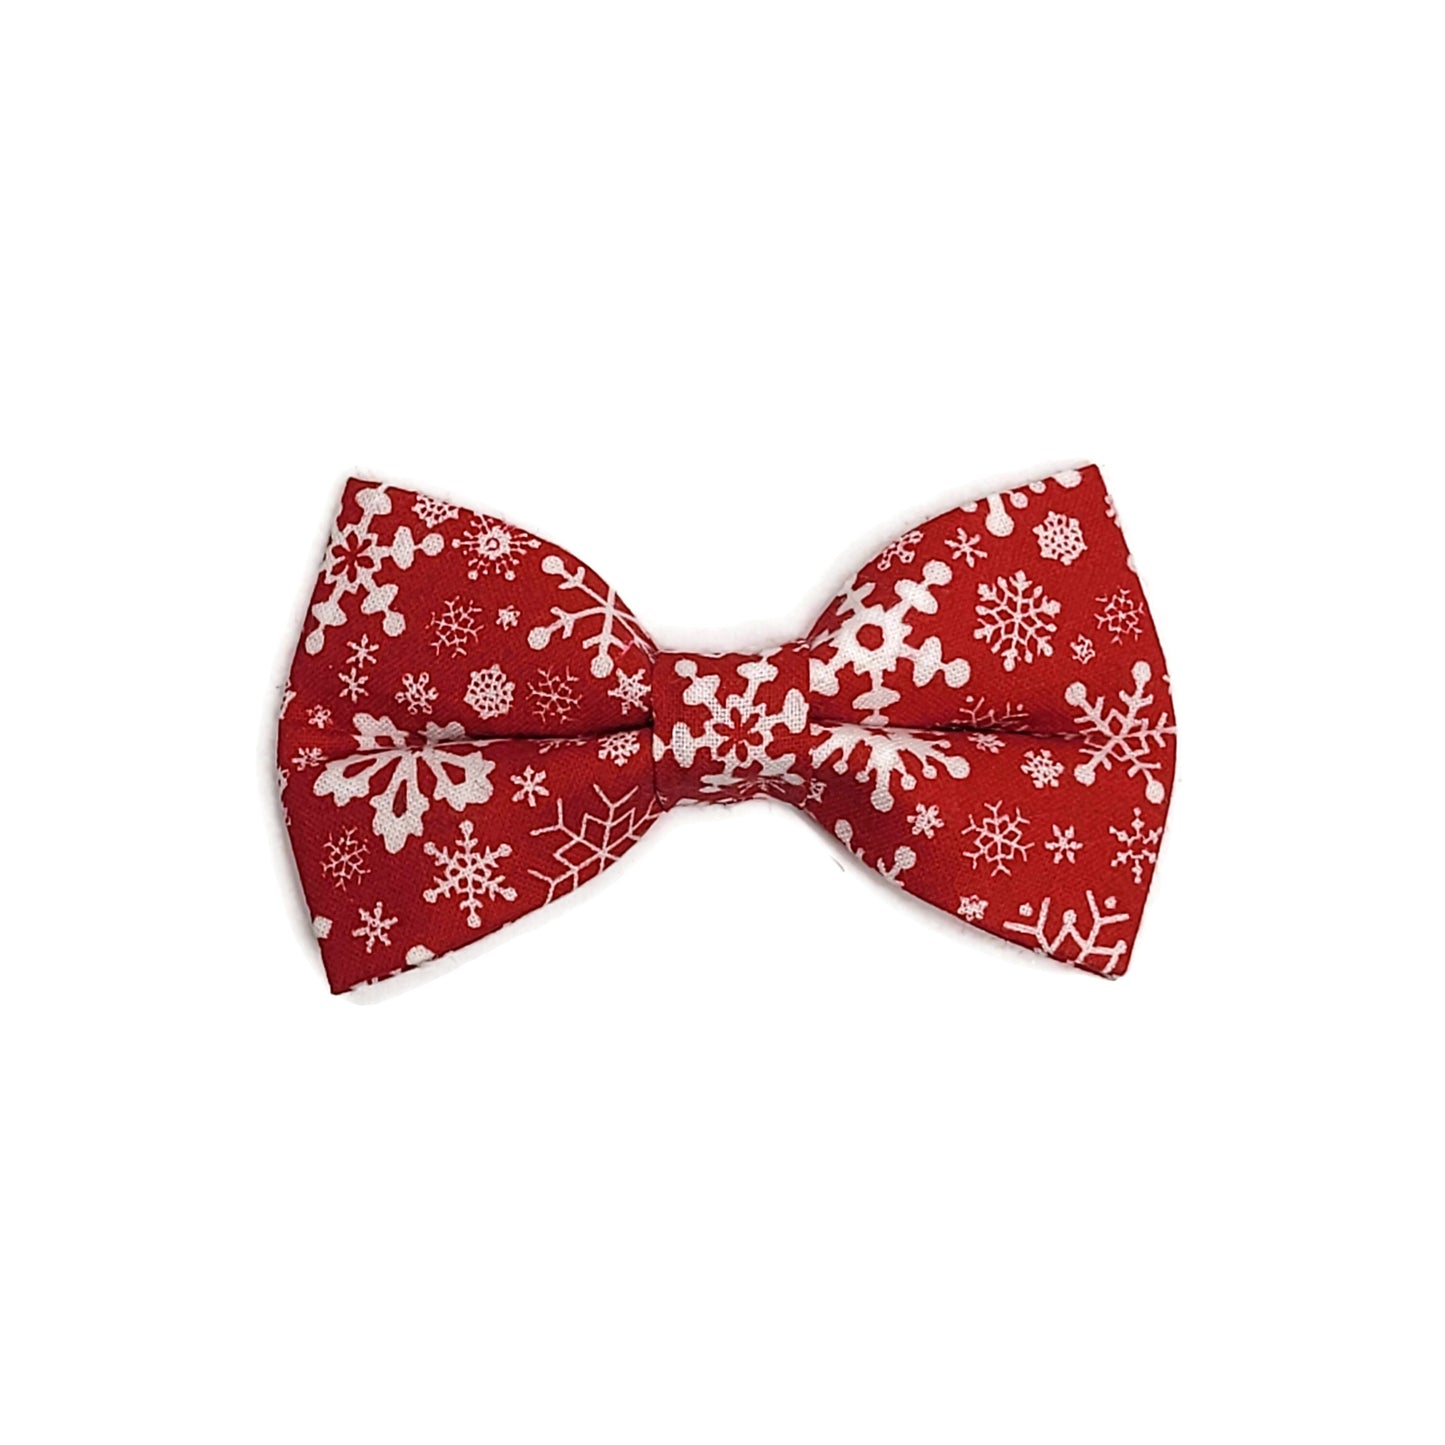 "The First Snow Fall" - Bow Tie